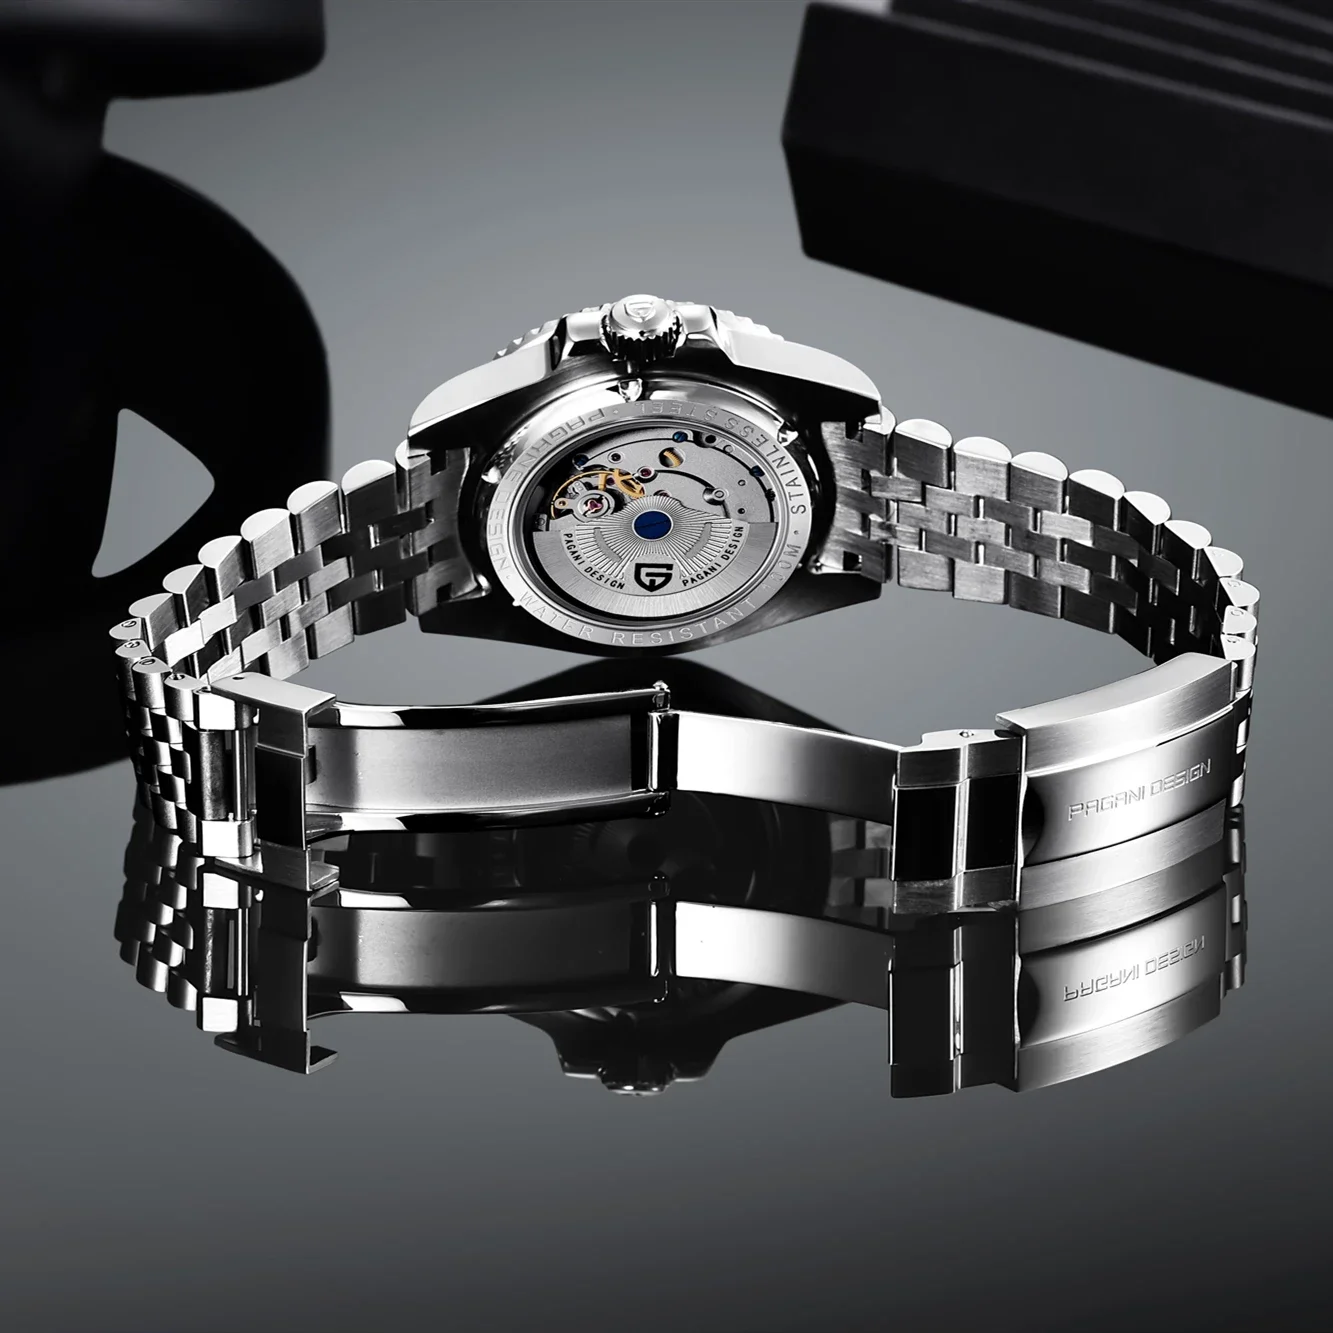 PAGANI DESIGN Luxury GMT Automatic Mechanical Watches For Men Classic High Quality Sapphire Glass Watch Fashion